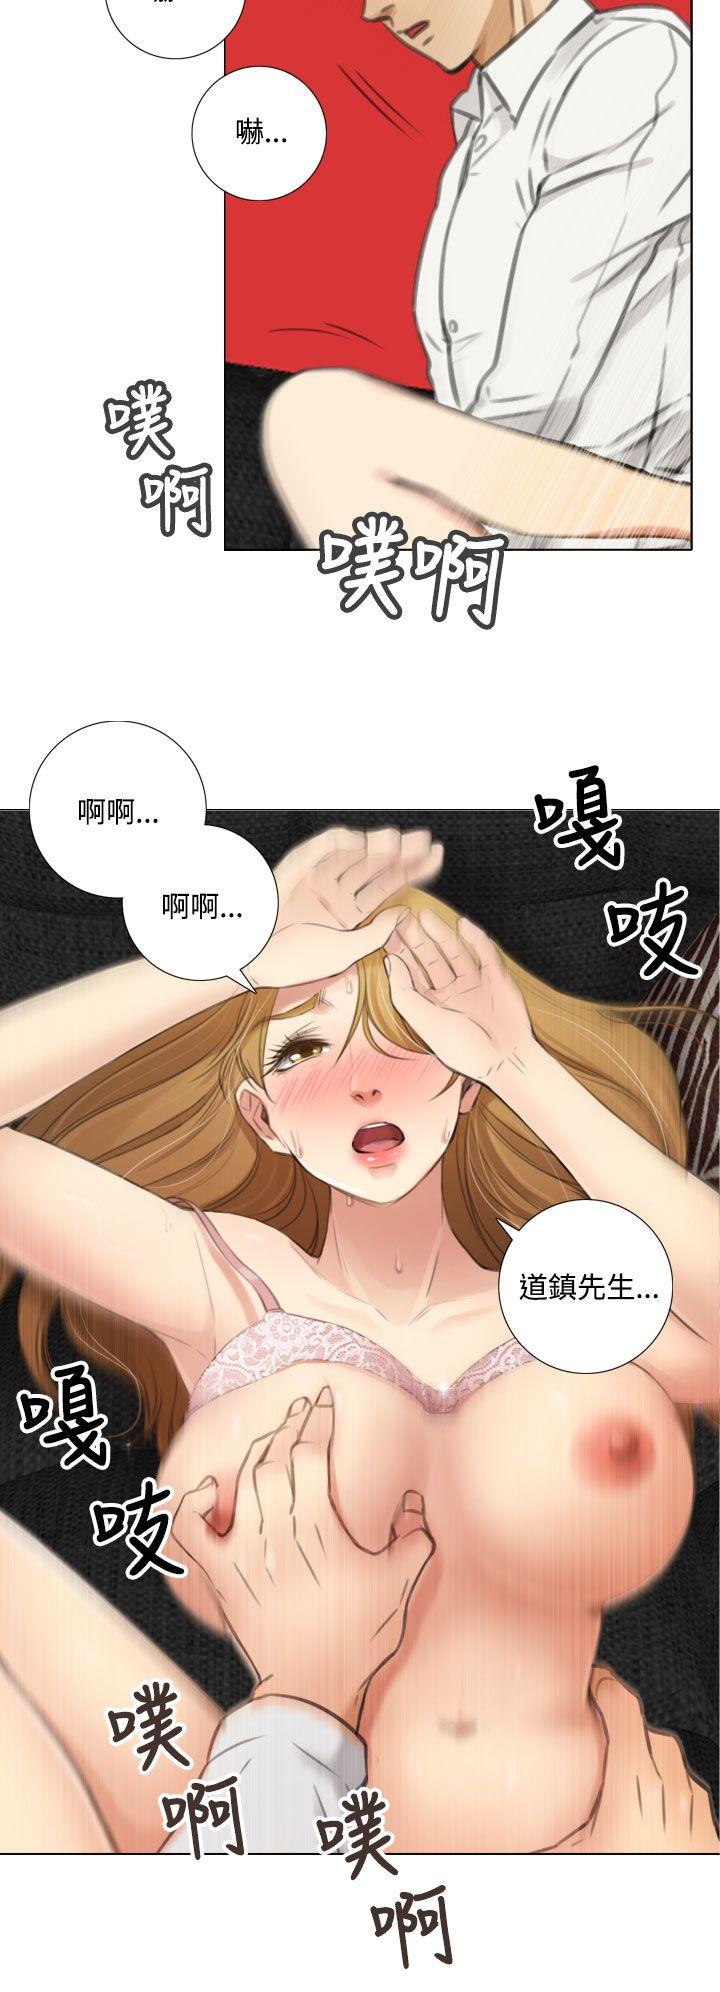 《TOUCH ME》漫画 第7话